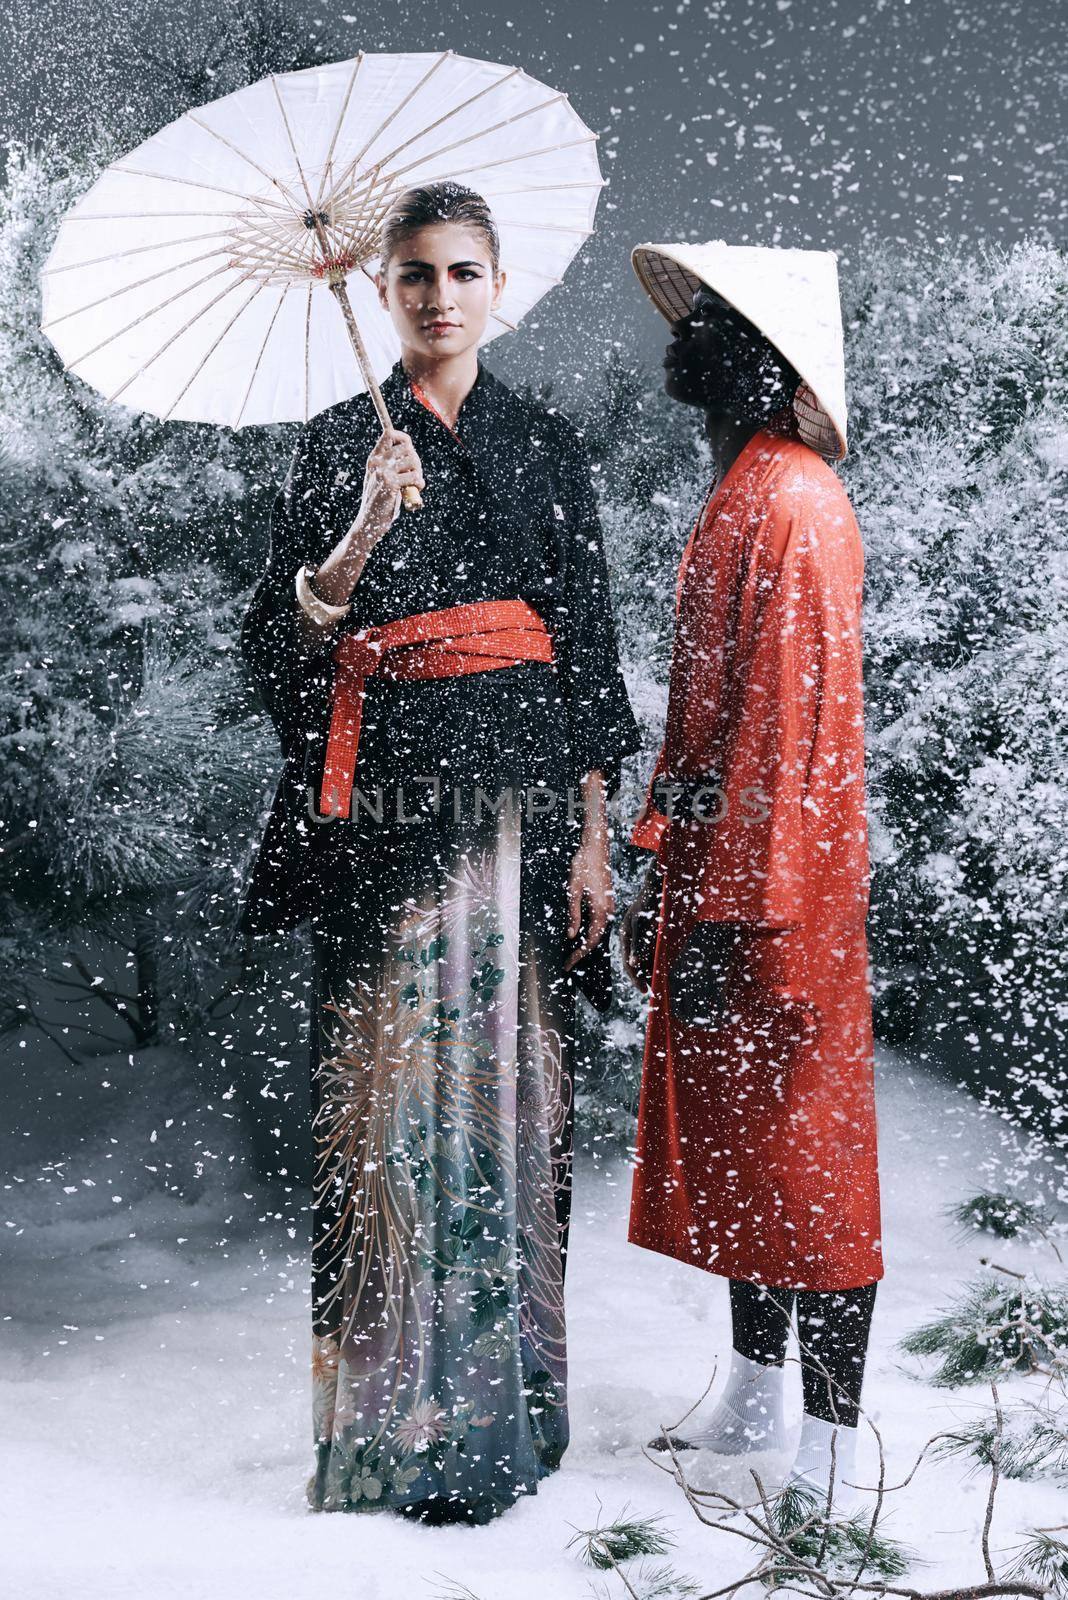 Fashion fairytale. Fashion shot of a man and woman wearing oriental-style clothing in a snowy forest. by YuriArcurs